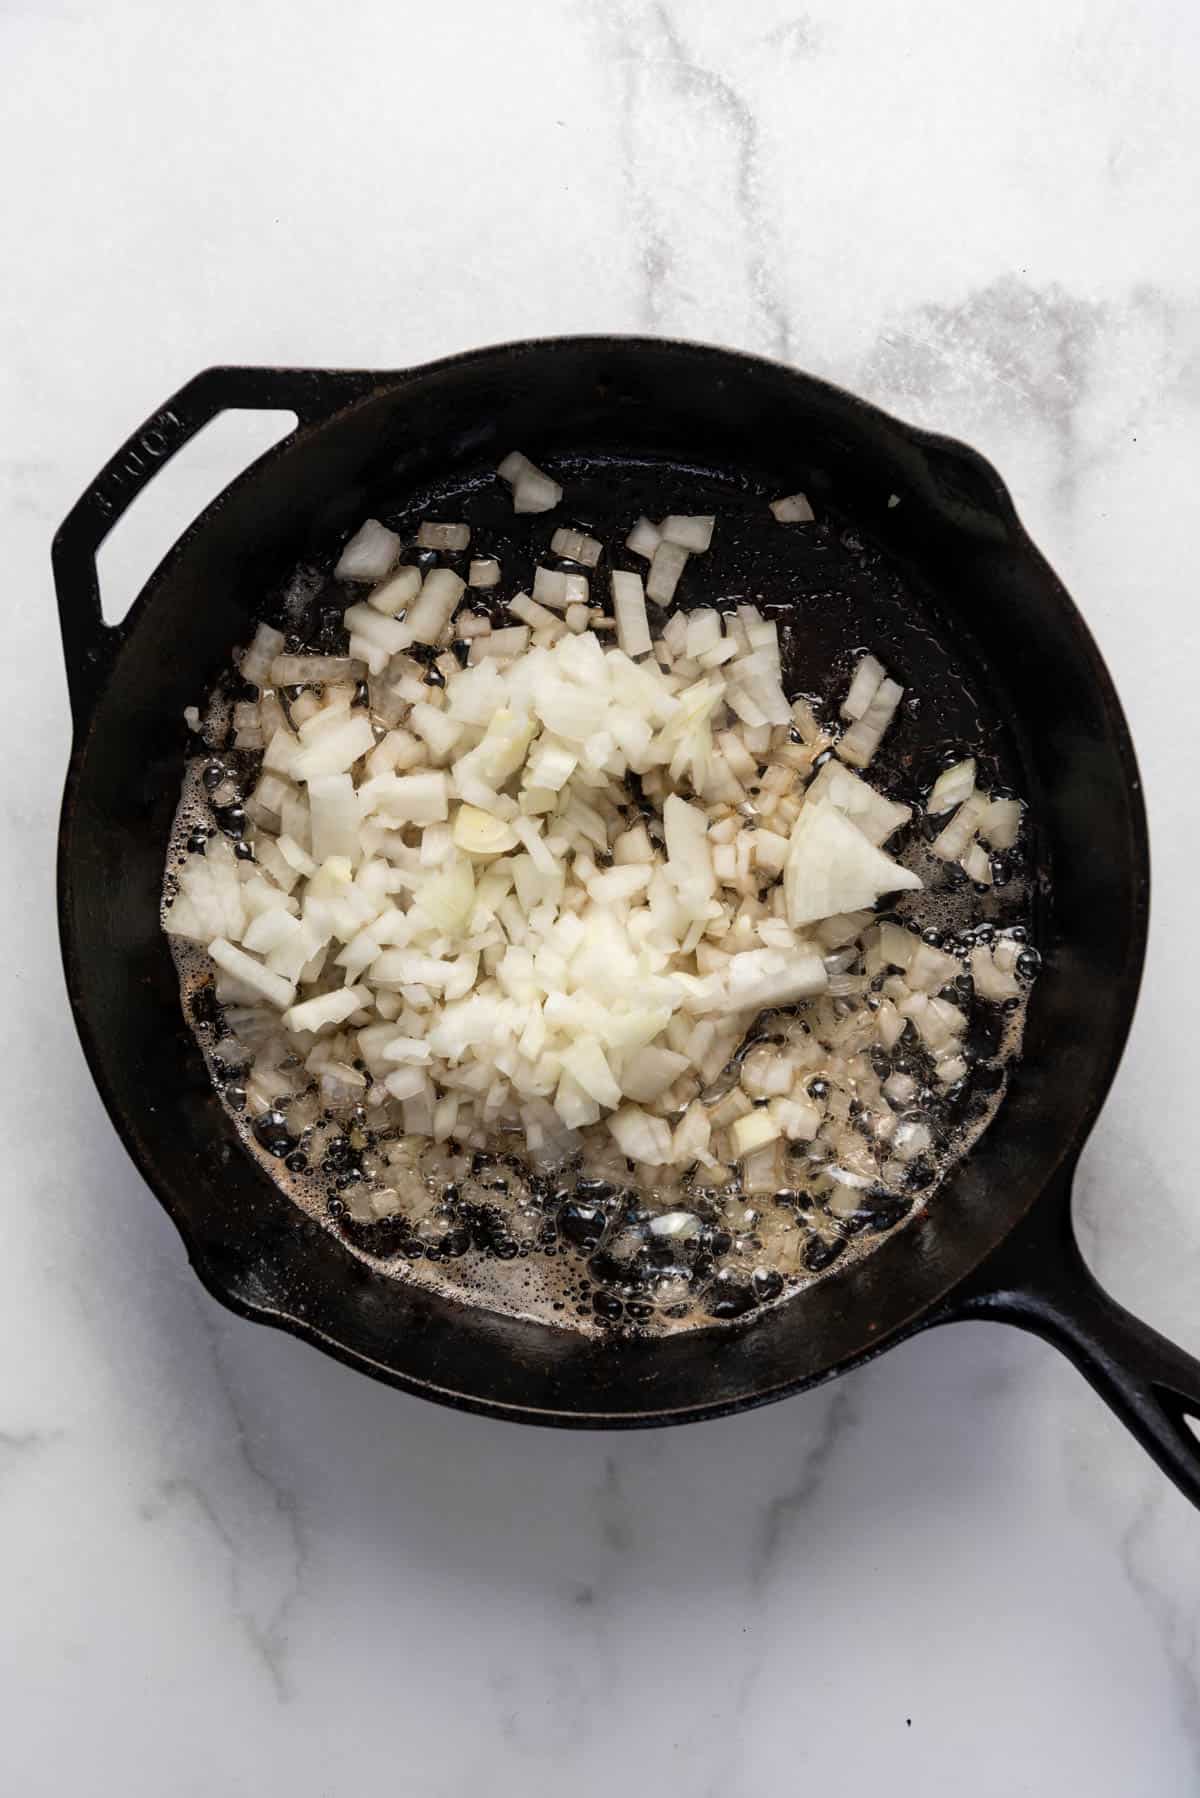 Chopped onions being sauteed in bacon grease in a cast iron skillet.